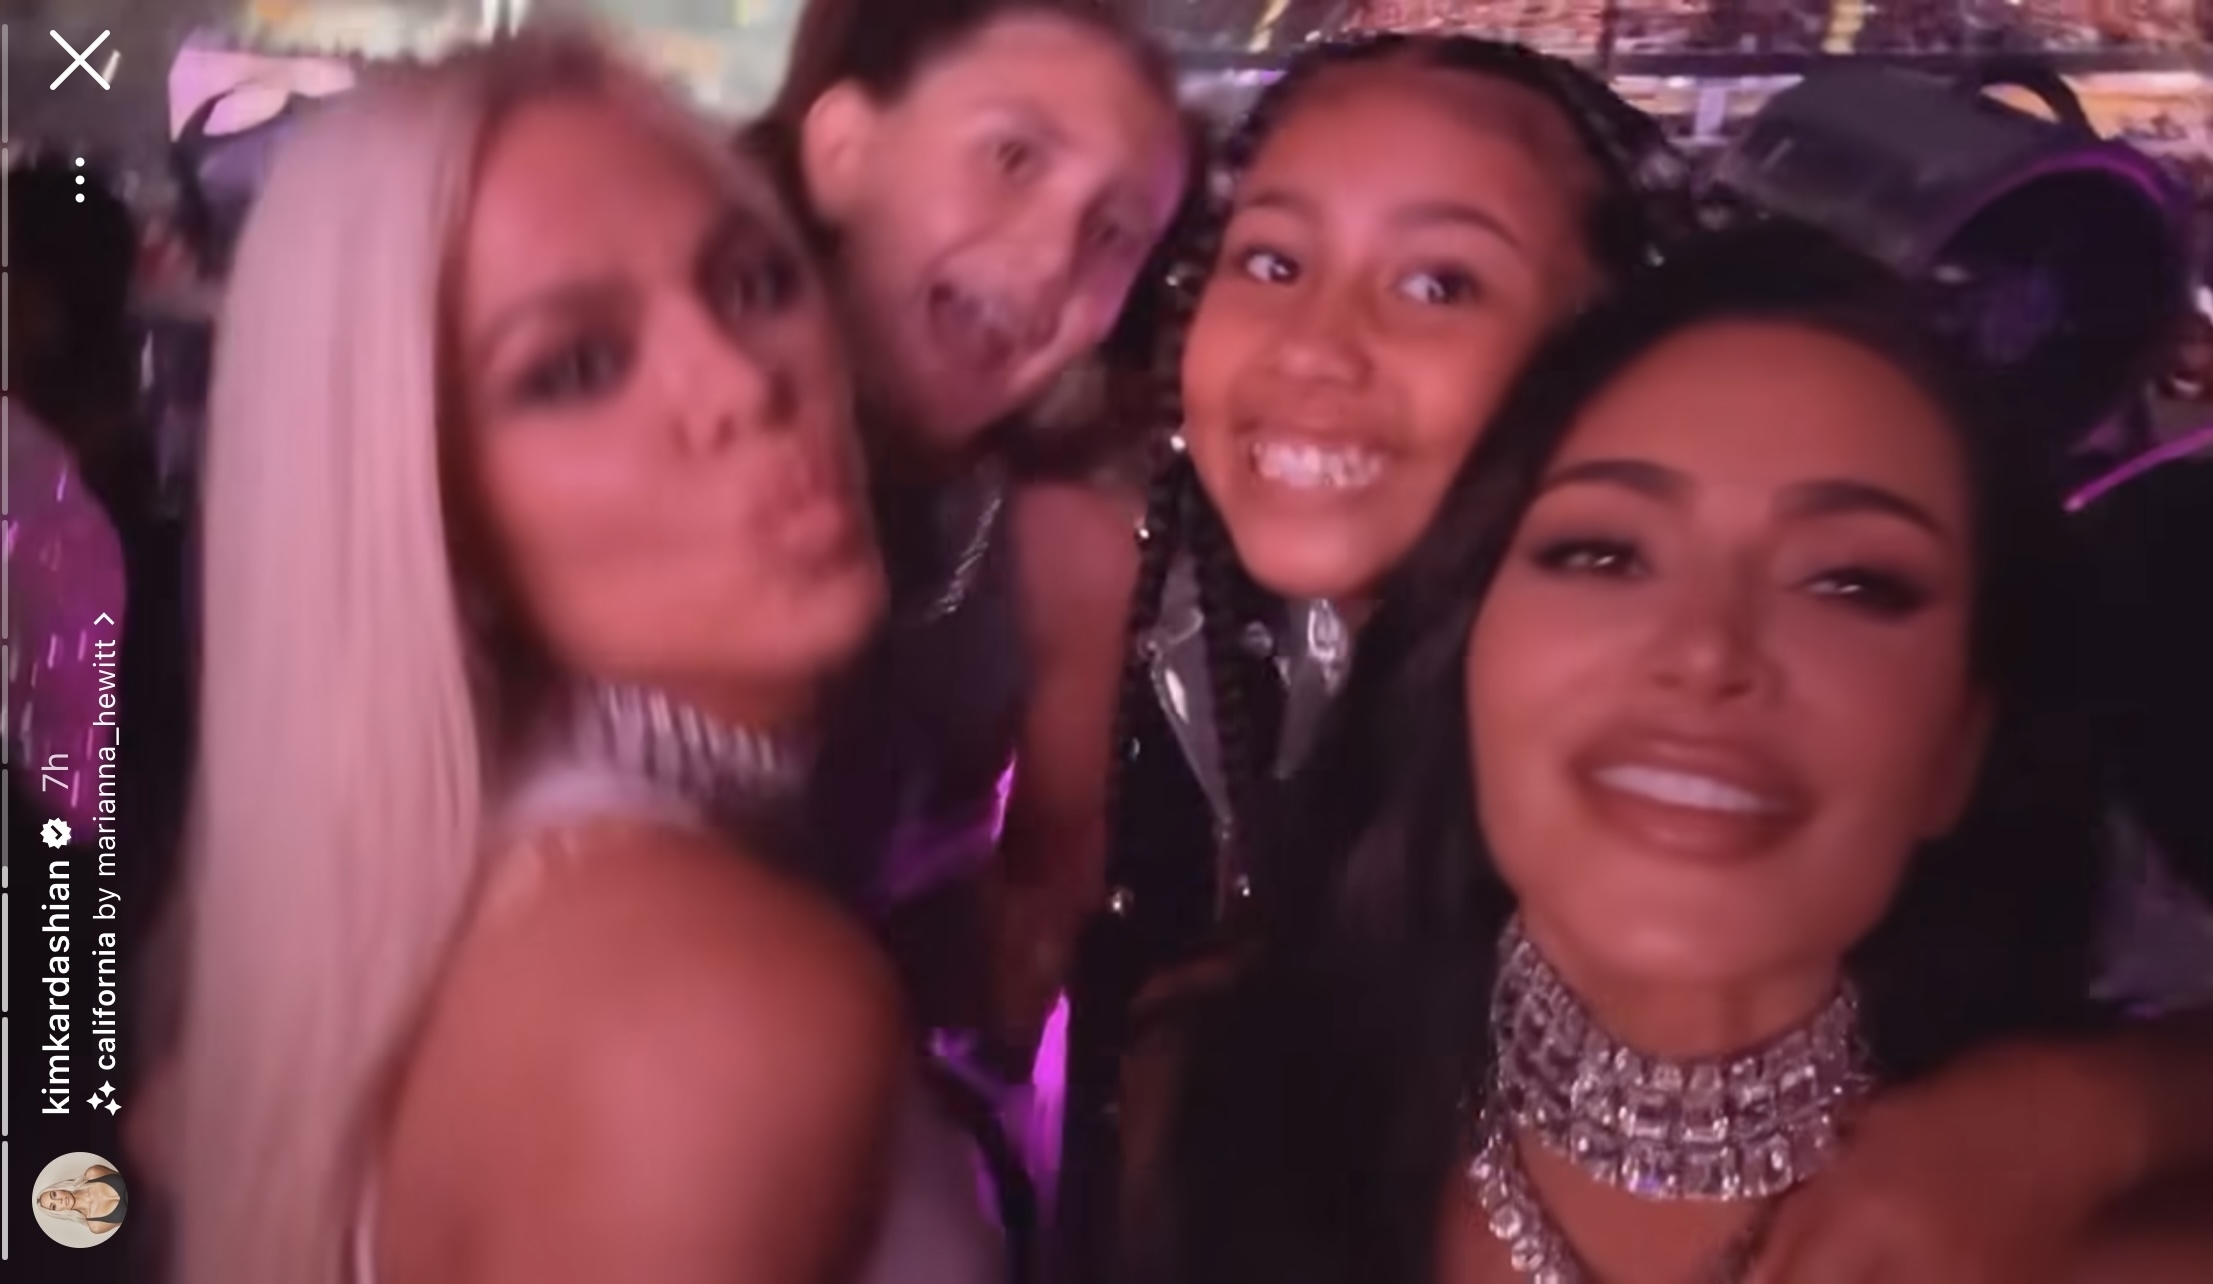 A selfie of Khloé, North, and Kim